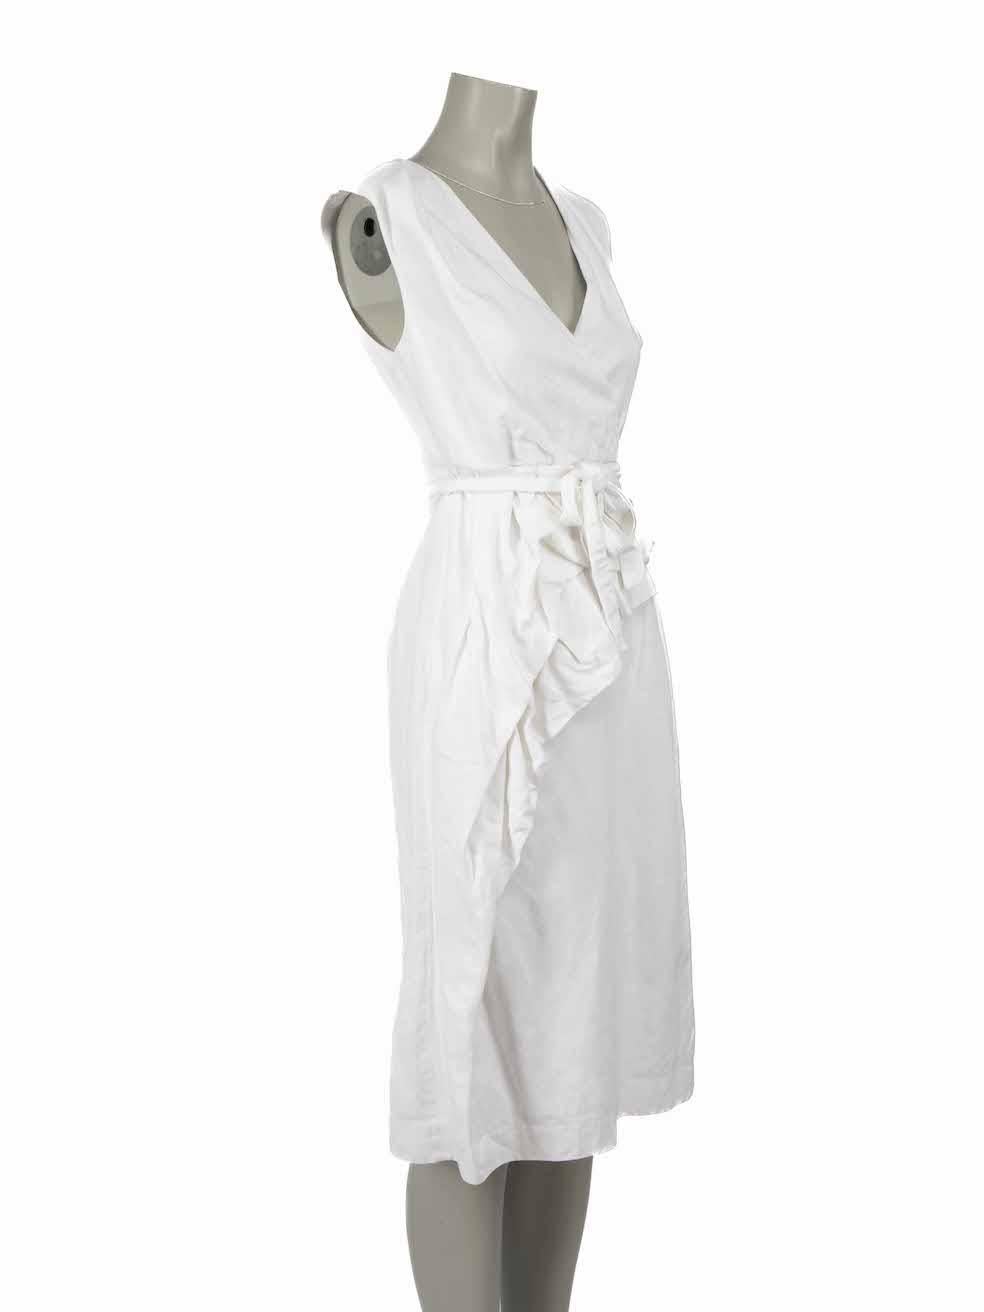 CONDITION is Very good. Hardly any visible wear to dress is evident on this used Dries Van Noten designer resale item.
 
Details
White
Cotton
Dress
Sleeveless
V-neck
Midi
Ruffle detail
Waist belt tie
Side zip fastening

Made in Belgium
